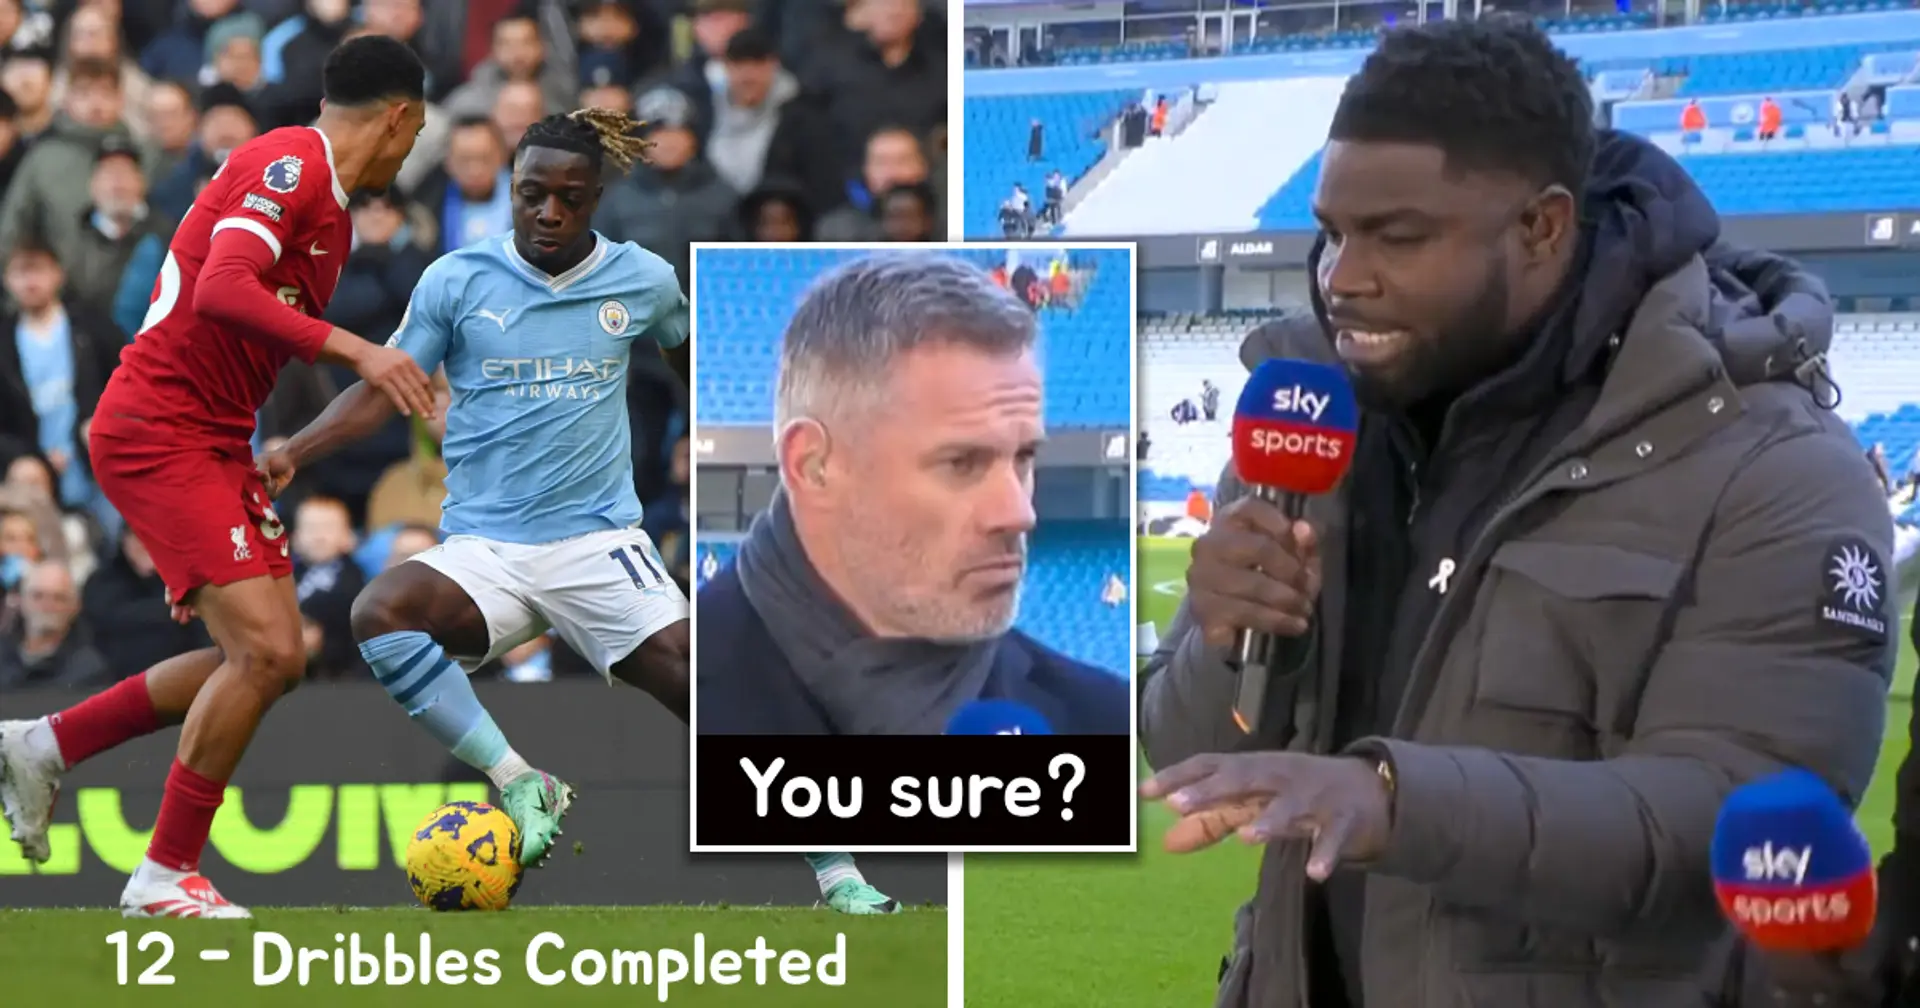 'You know what Doku's going to do': Micah Richards claims he'd rather play against Doku than Grealish